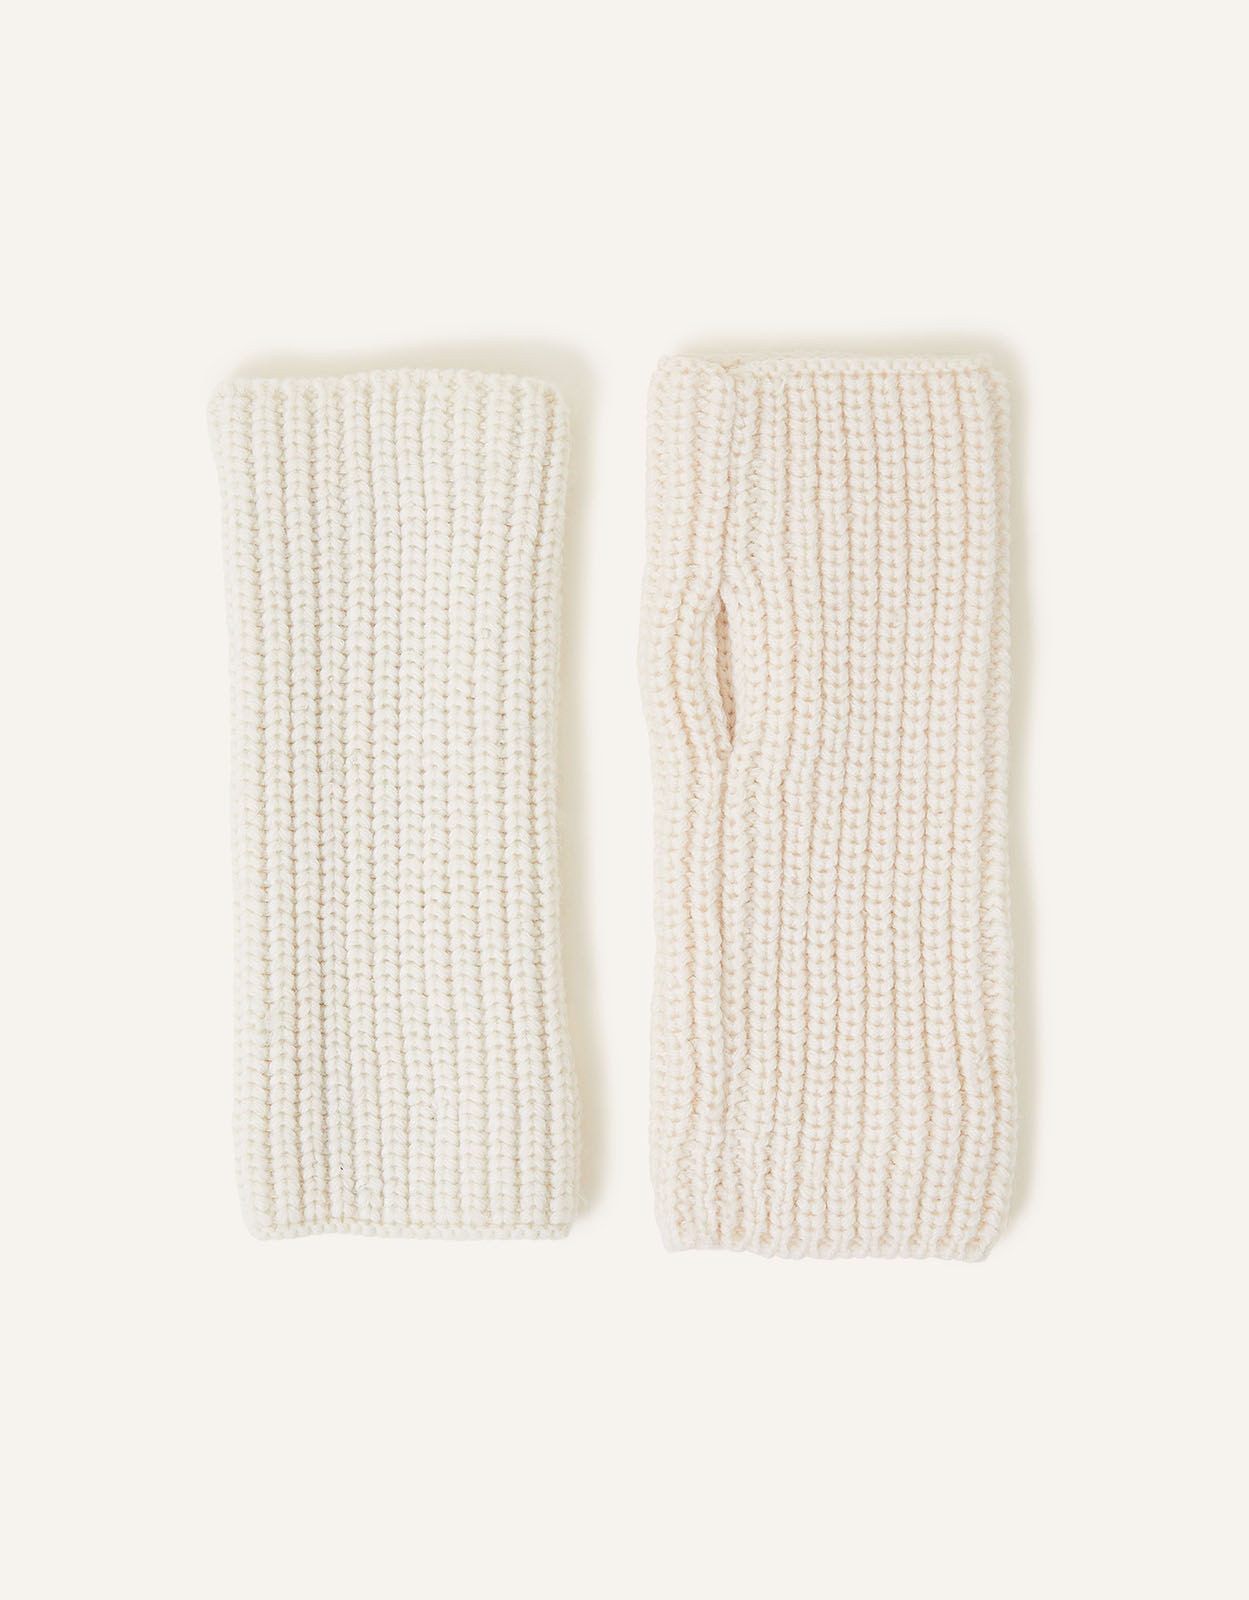 Accessorize Cream Ribbed Cut Off Gloves, Size: 21cm